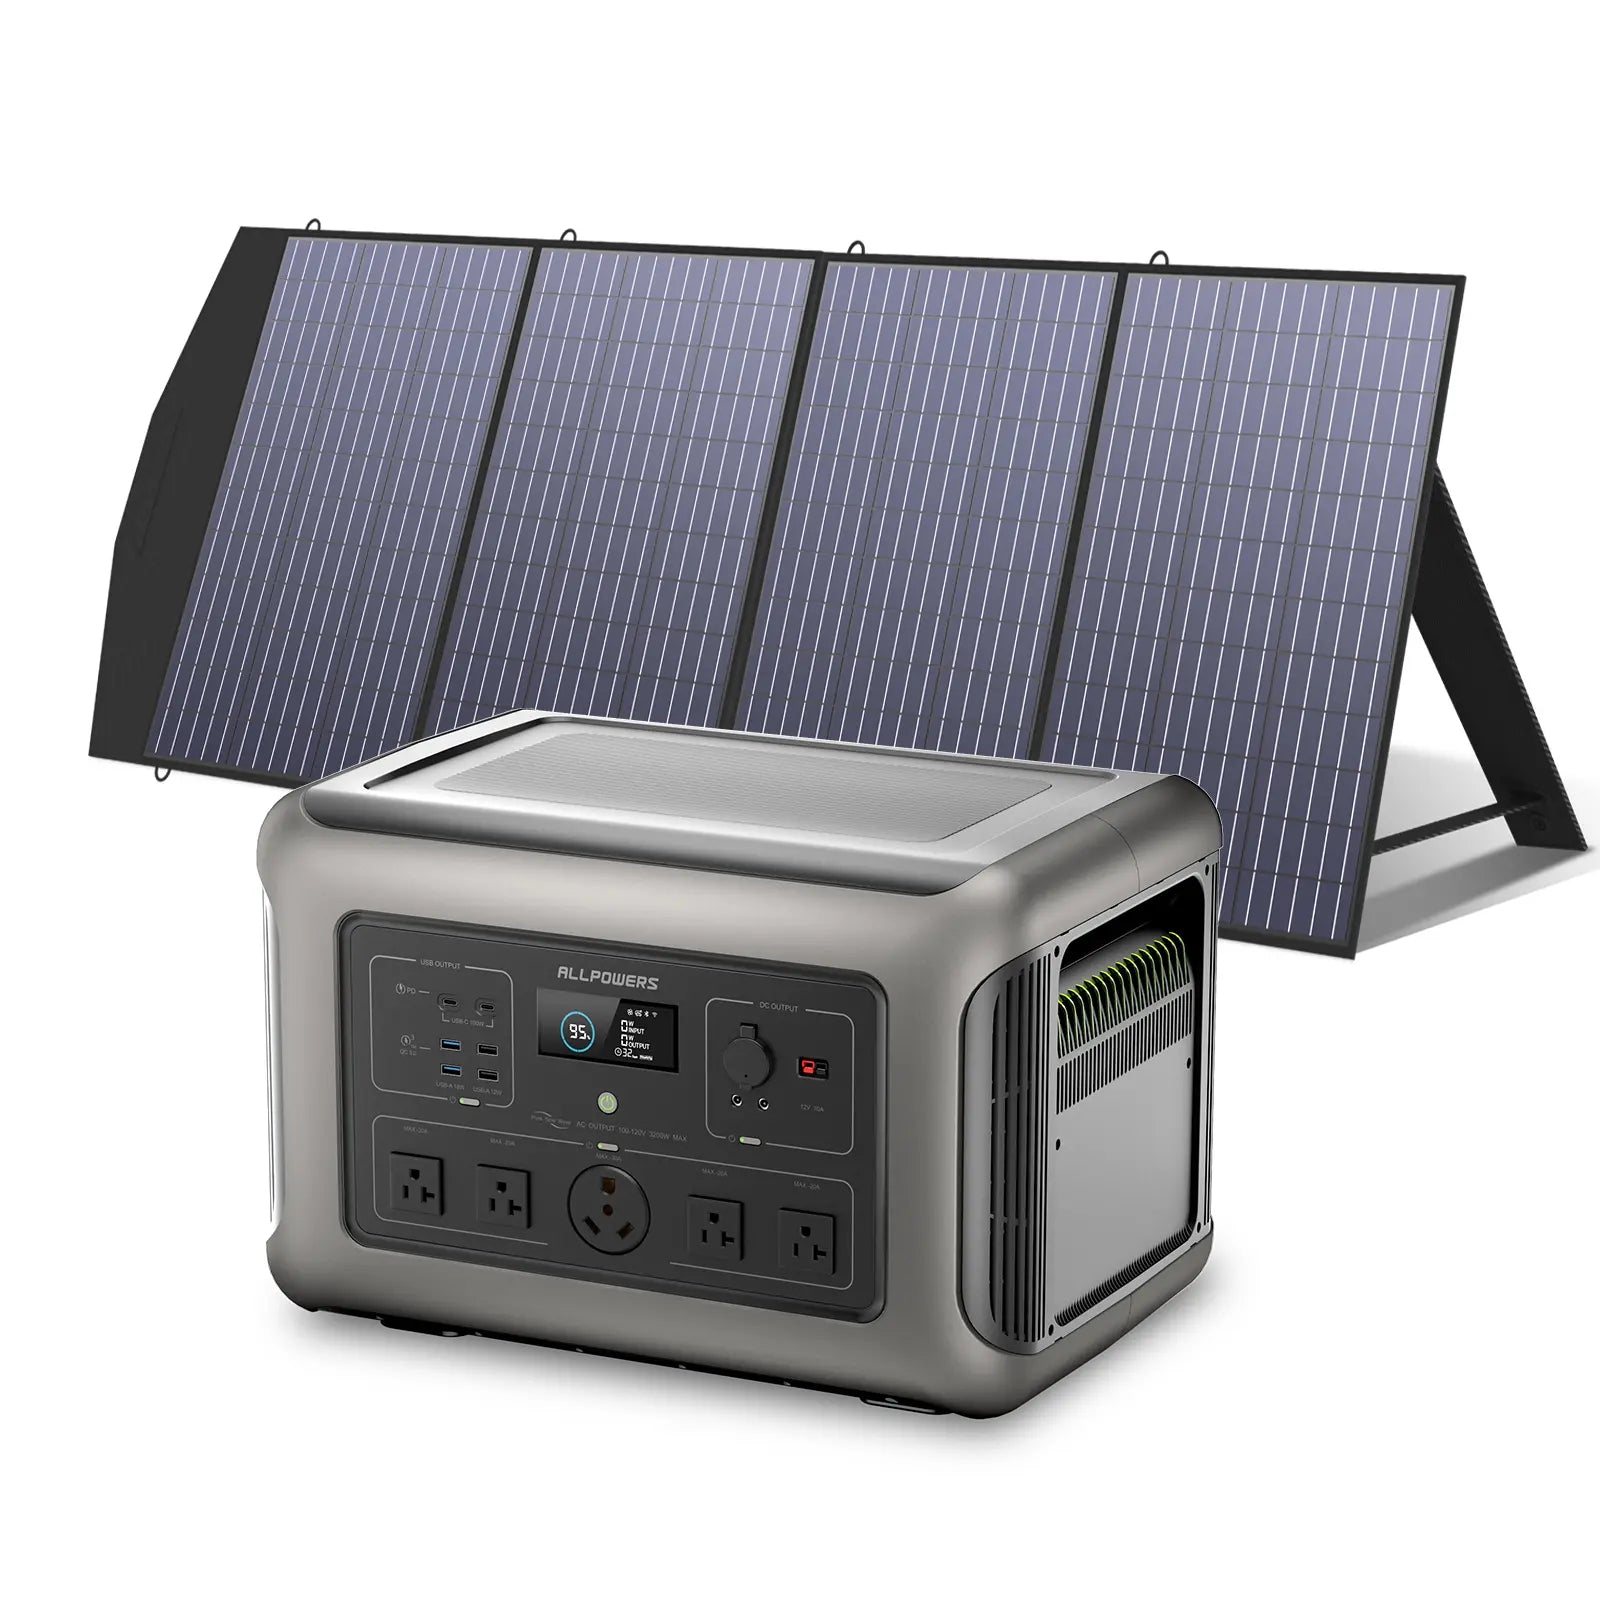 ALLPOWERS R1500 1800W 1152Wh Portable Power Station LiFeP04